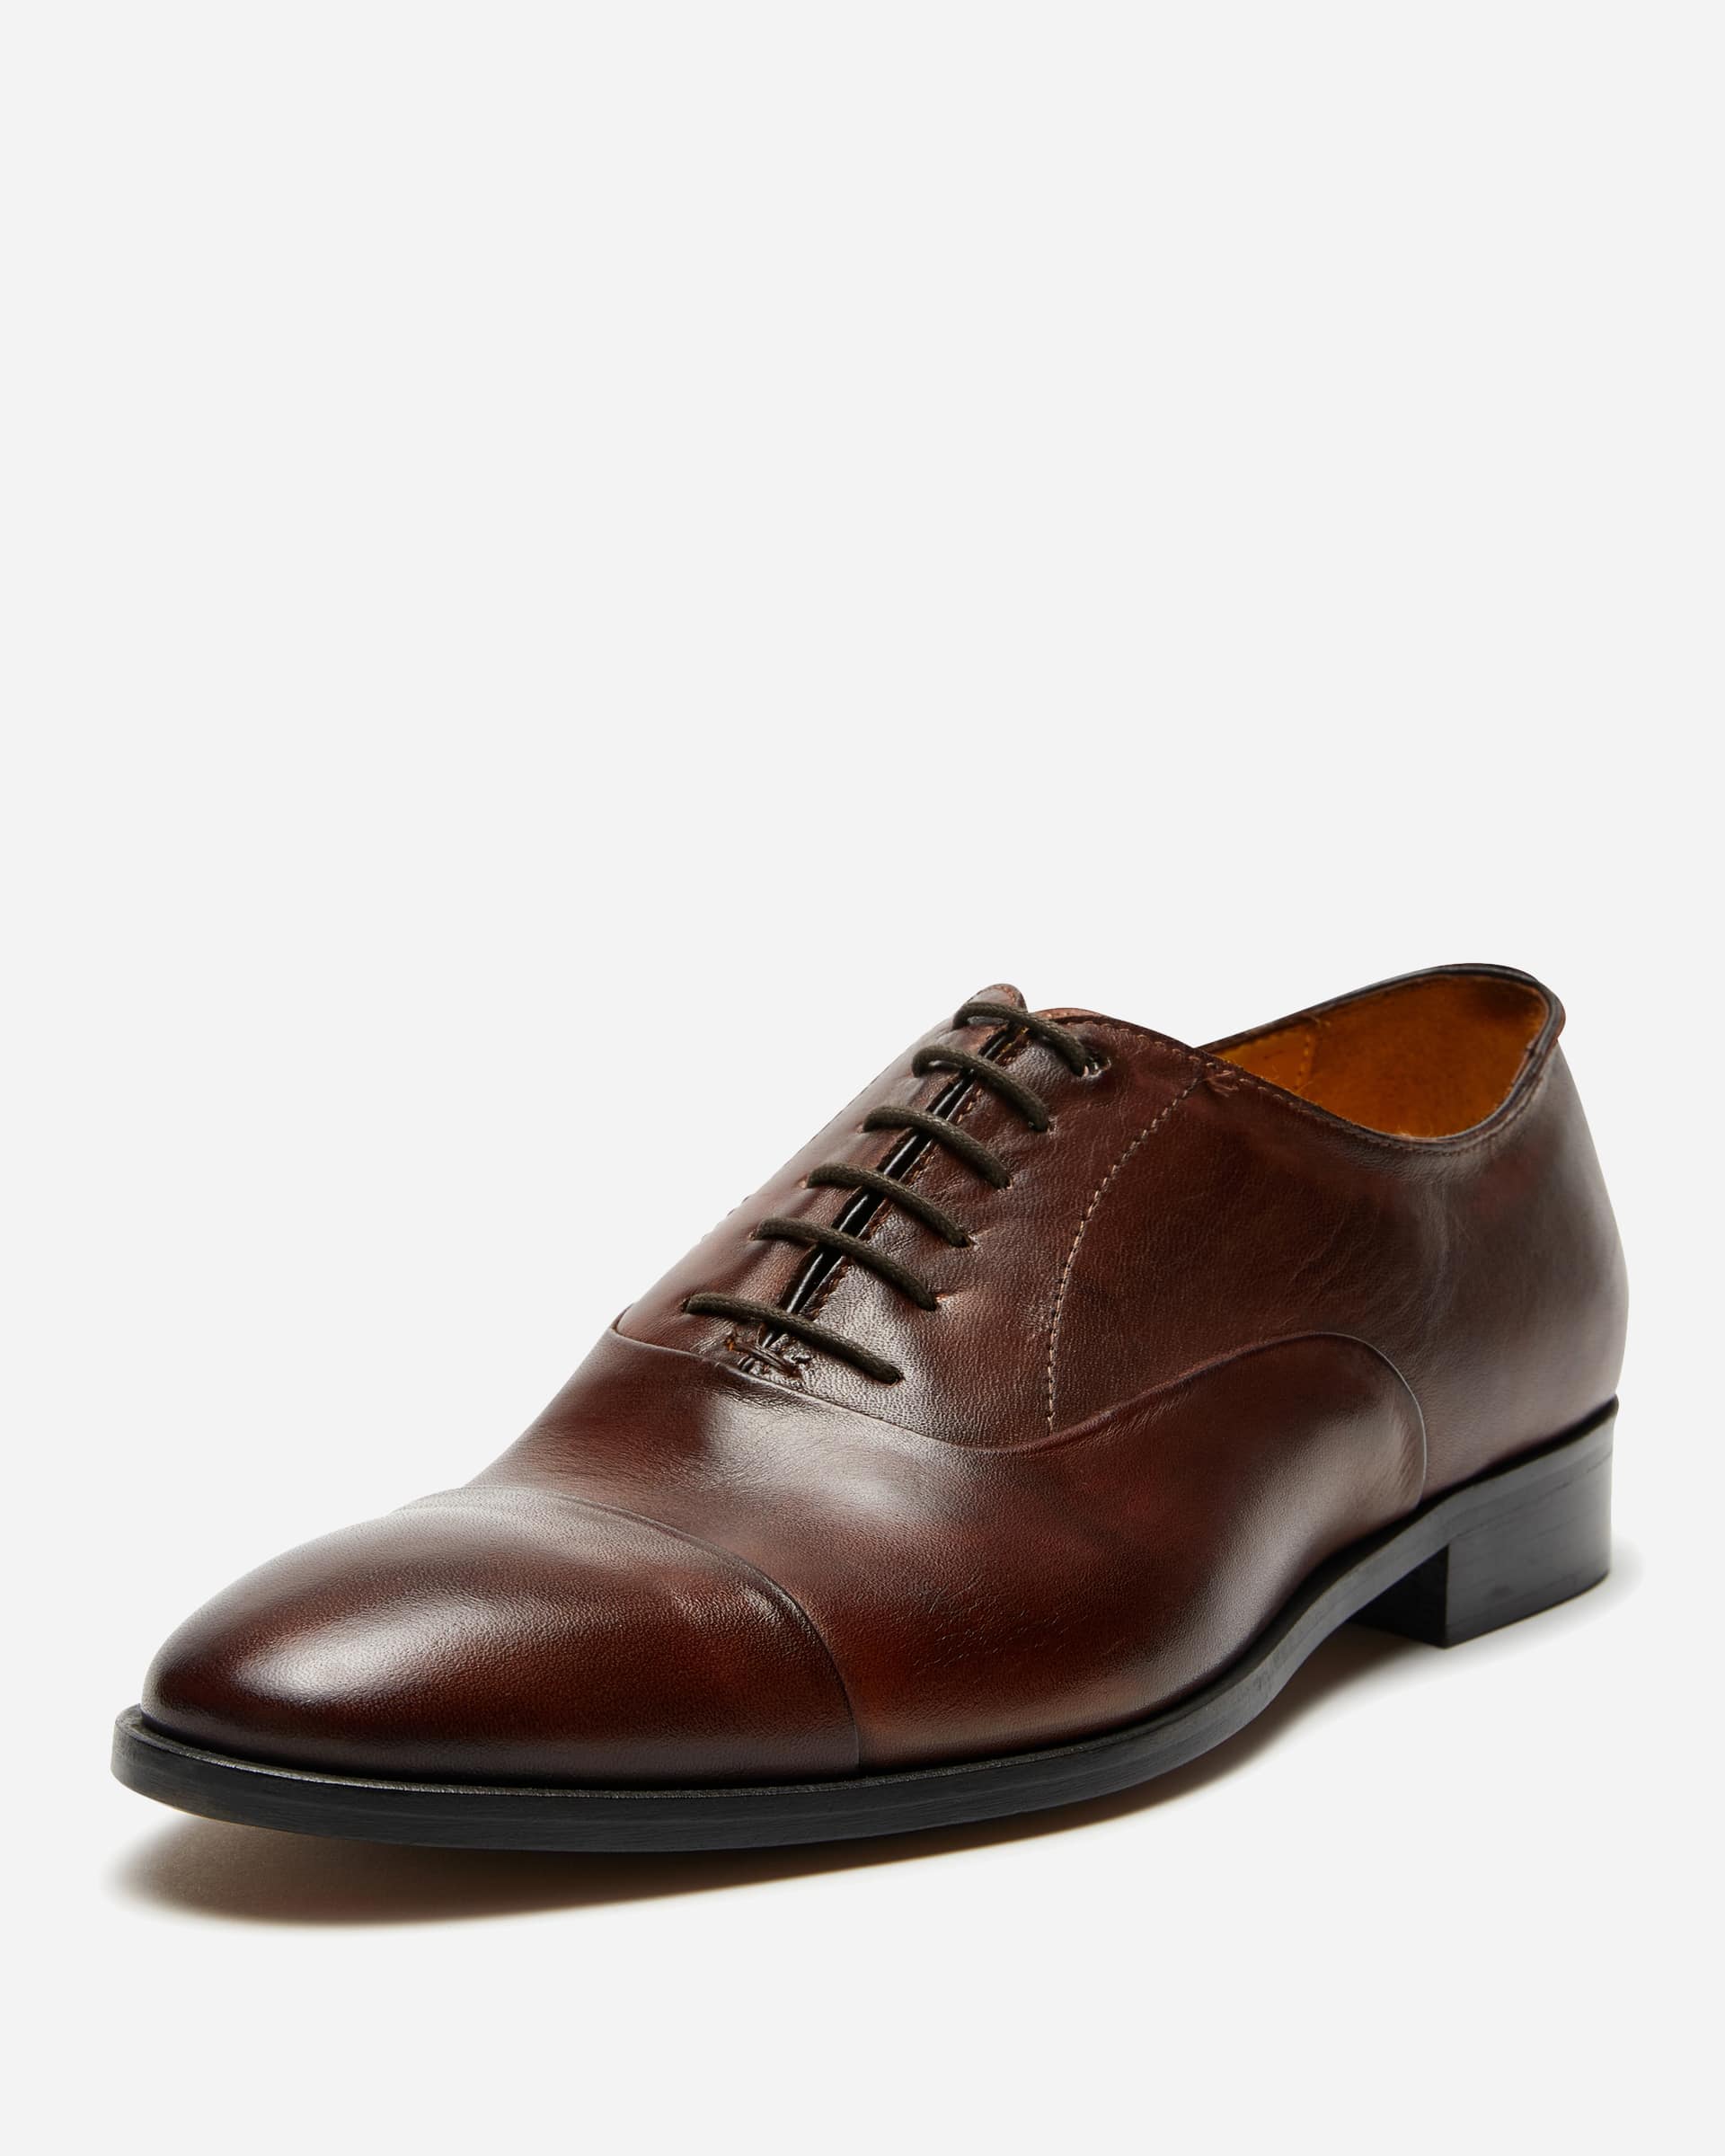 Oxford Shoe with Toe Cap - Men's Lace Up at Menzclub